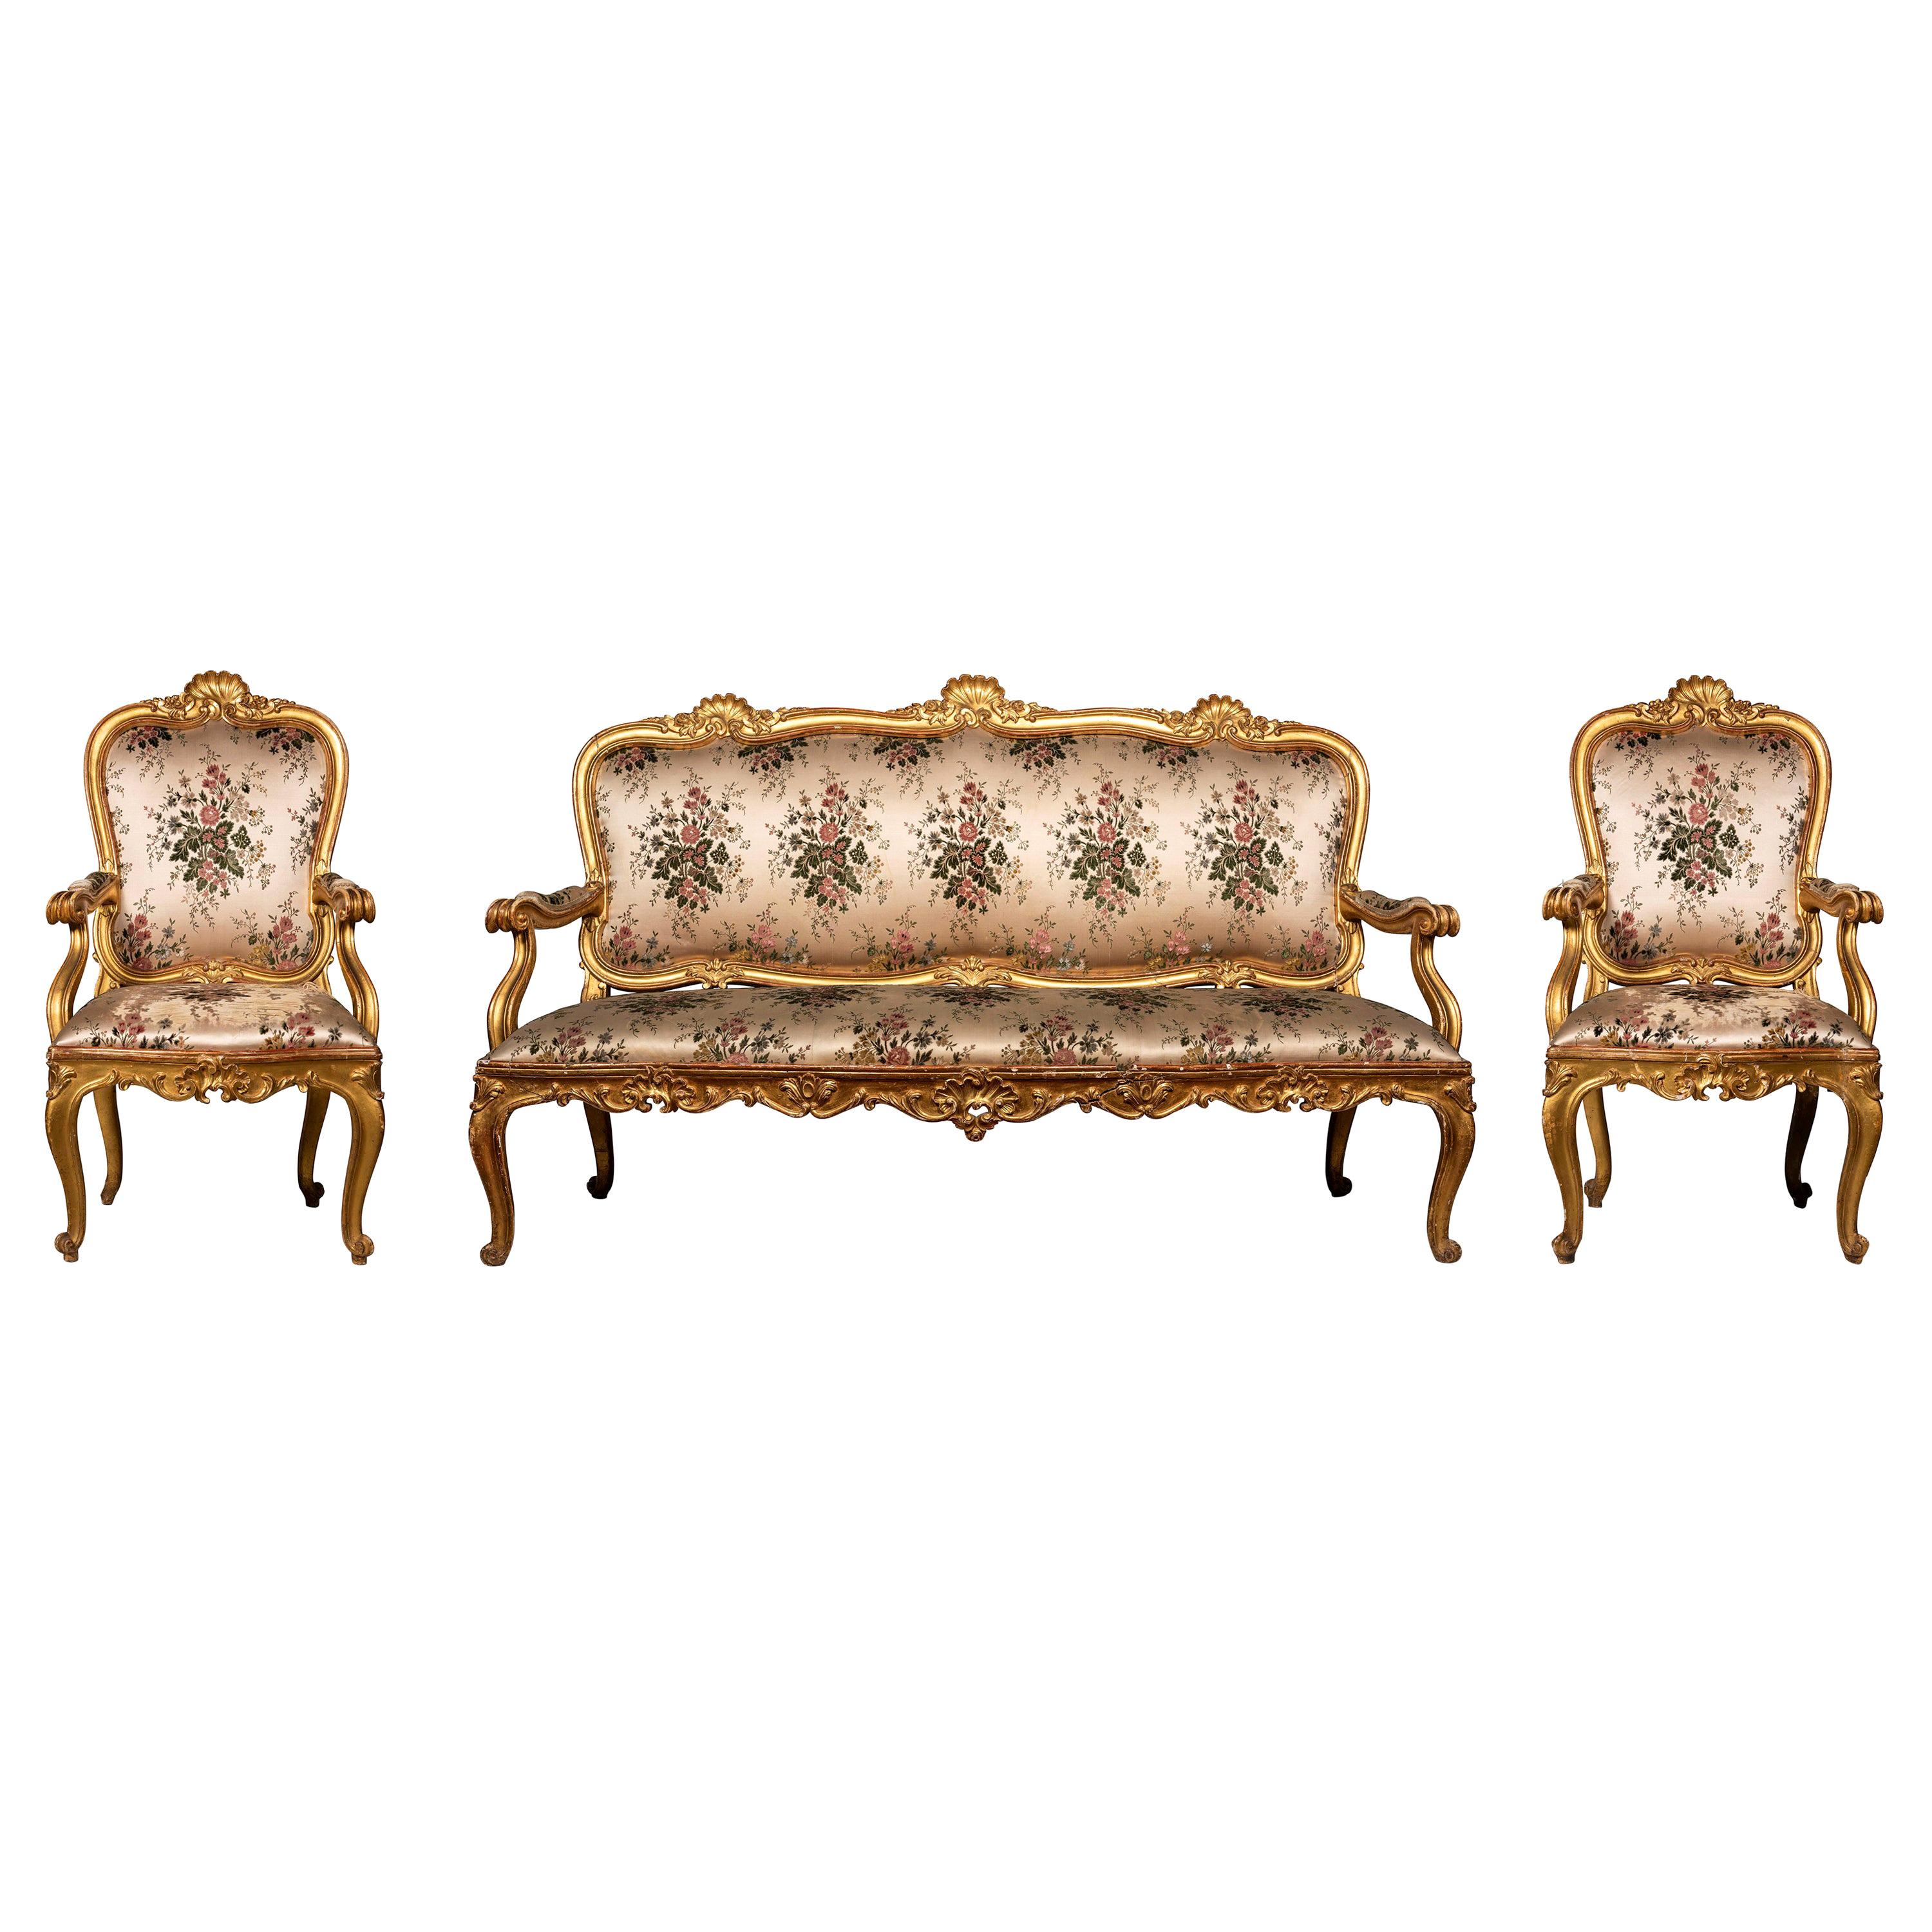 Late 18th Century Venetian Giltwood Suite For Sale